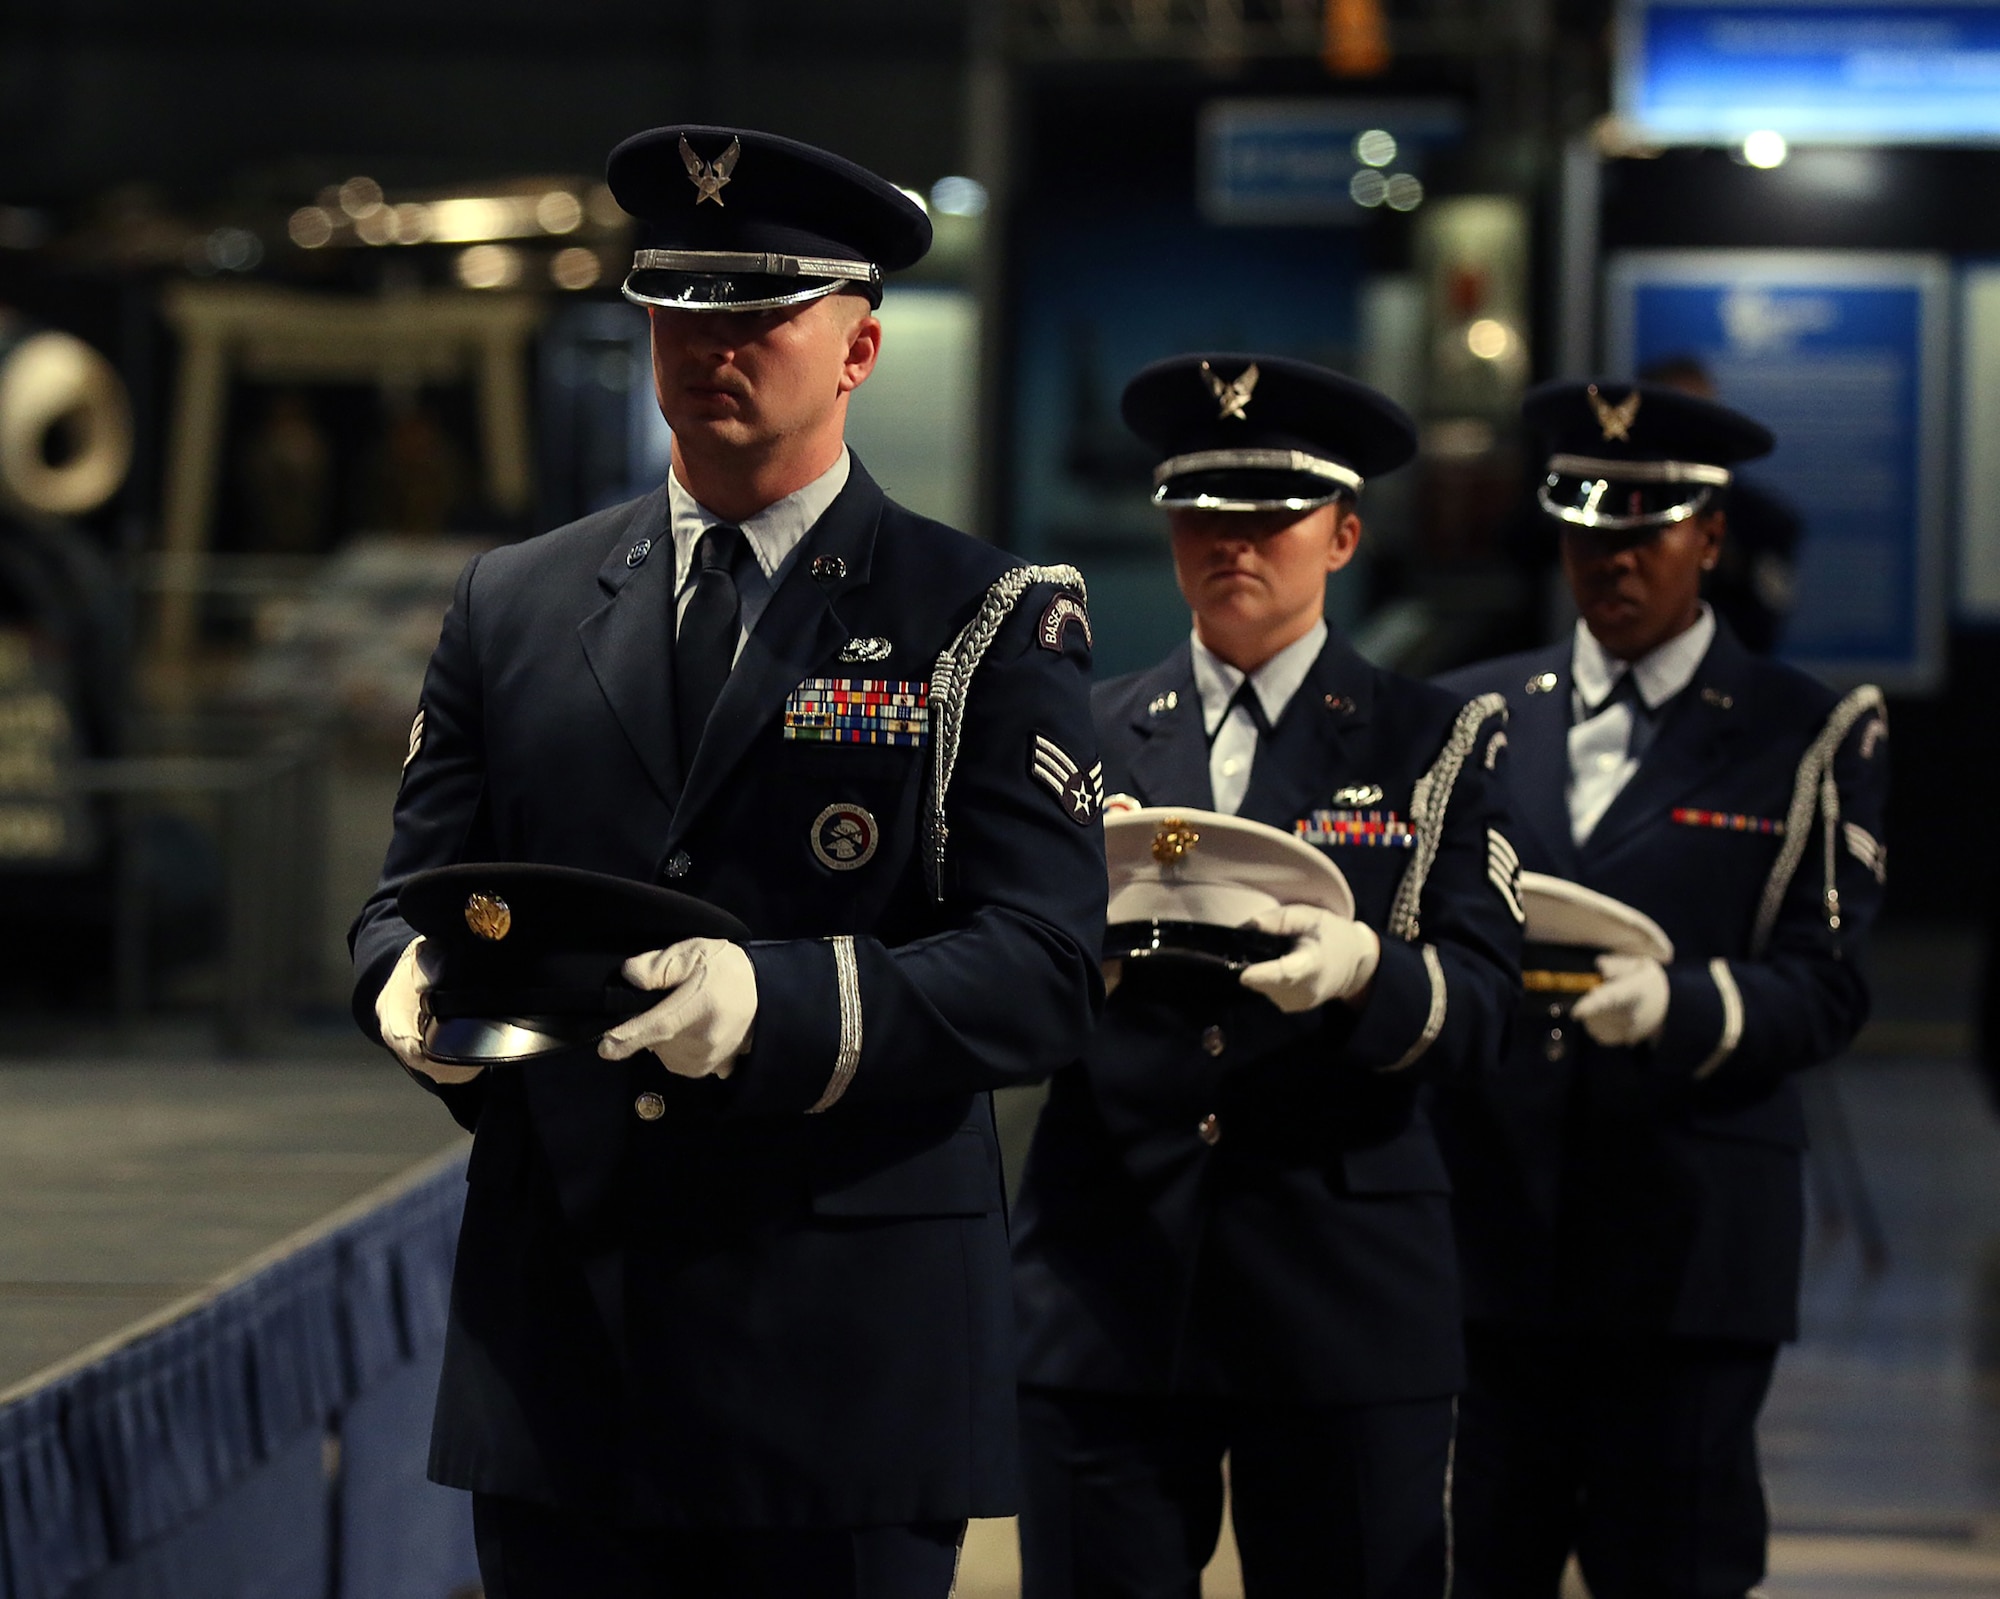 Senior Airman Joseph Divish, front, leads the way as members of the Wright-Patterson Air Force Base Honor Guard perform at the 445th’s annual awards ceremony April 2016l. Divish was recognized as the 445th Honor Guard Member of the Year during the event. (U.S. Air Force photo/Tech. Sgt. Patrick O'Reilly)